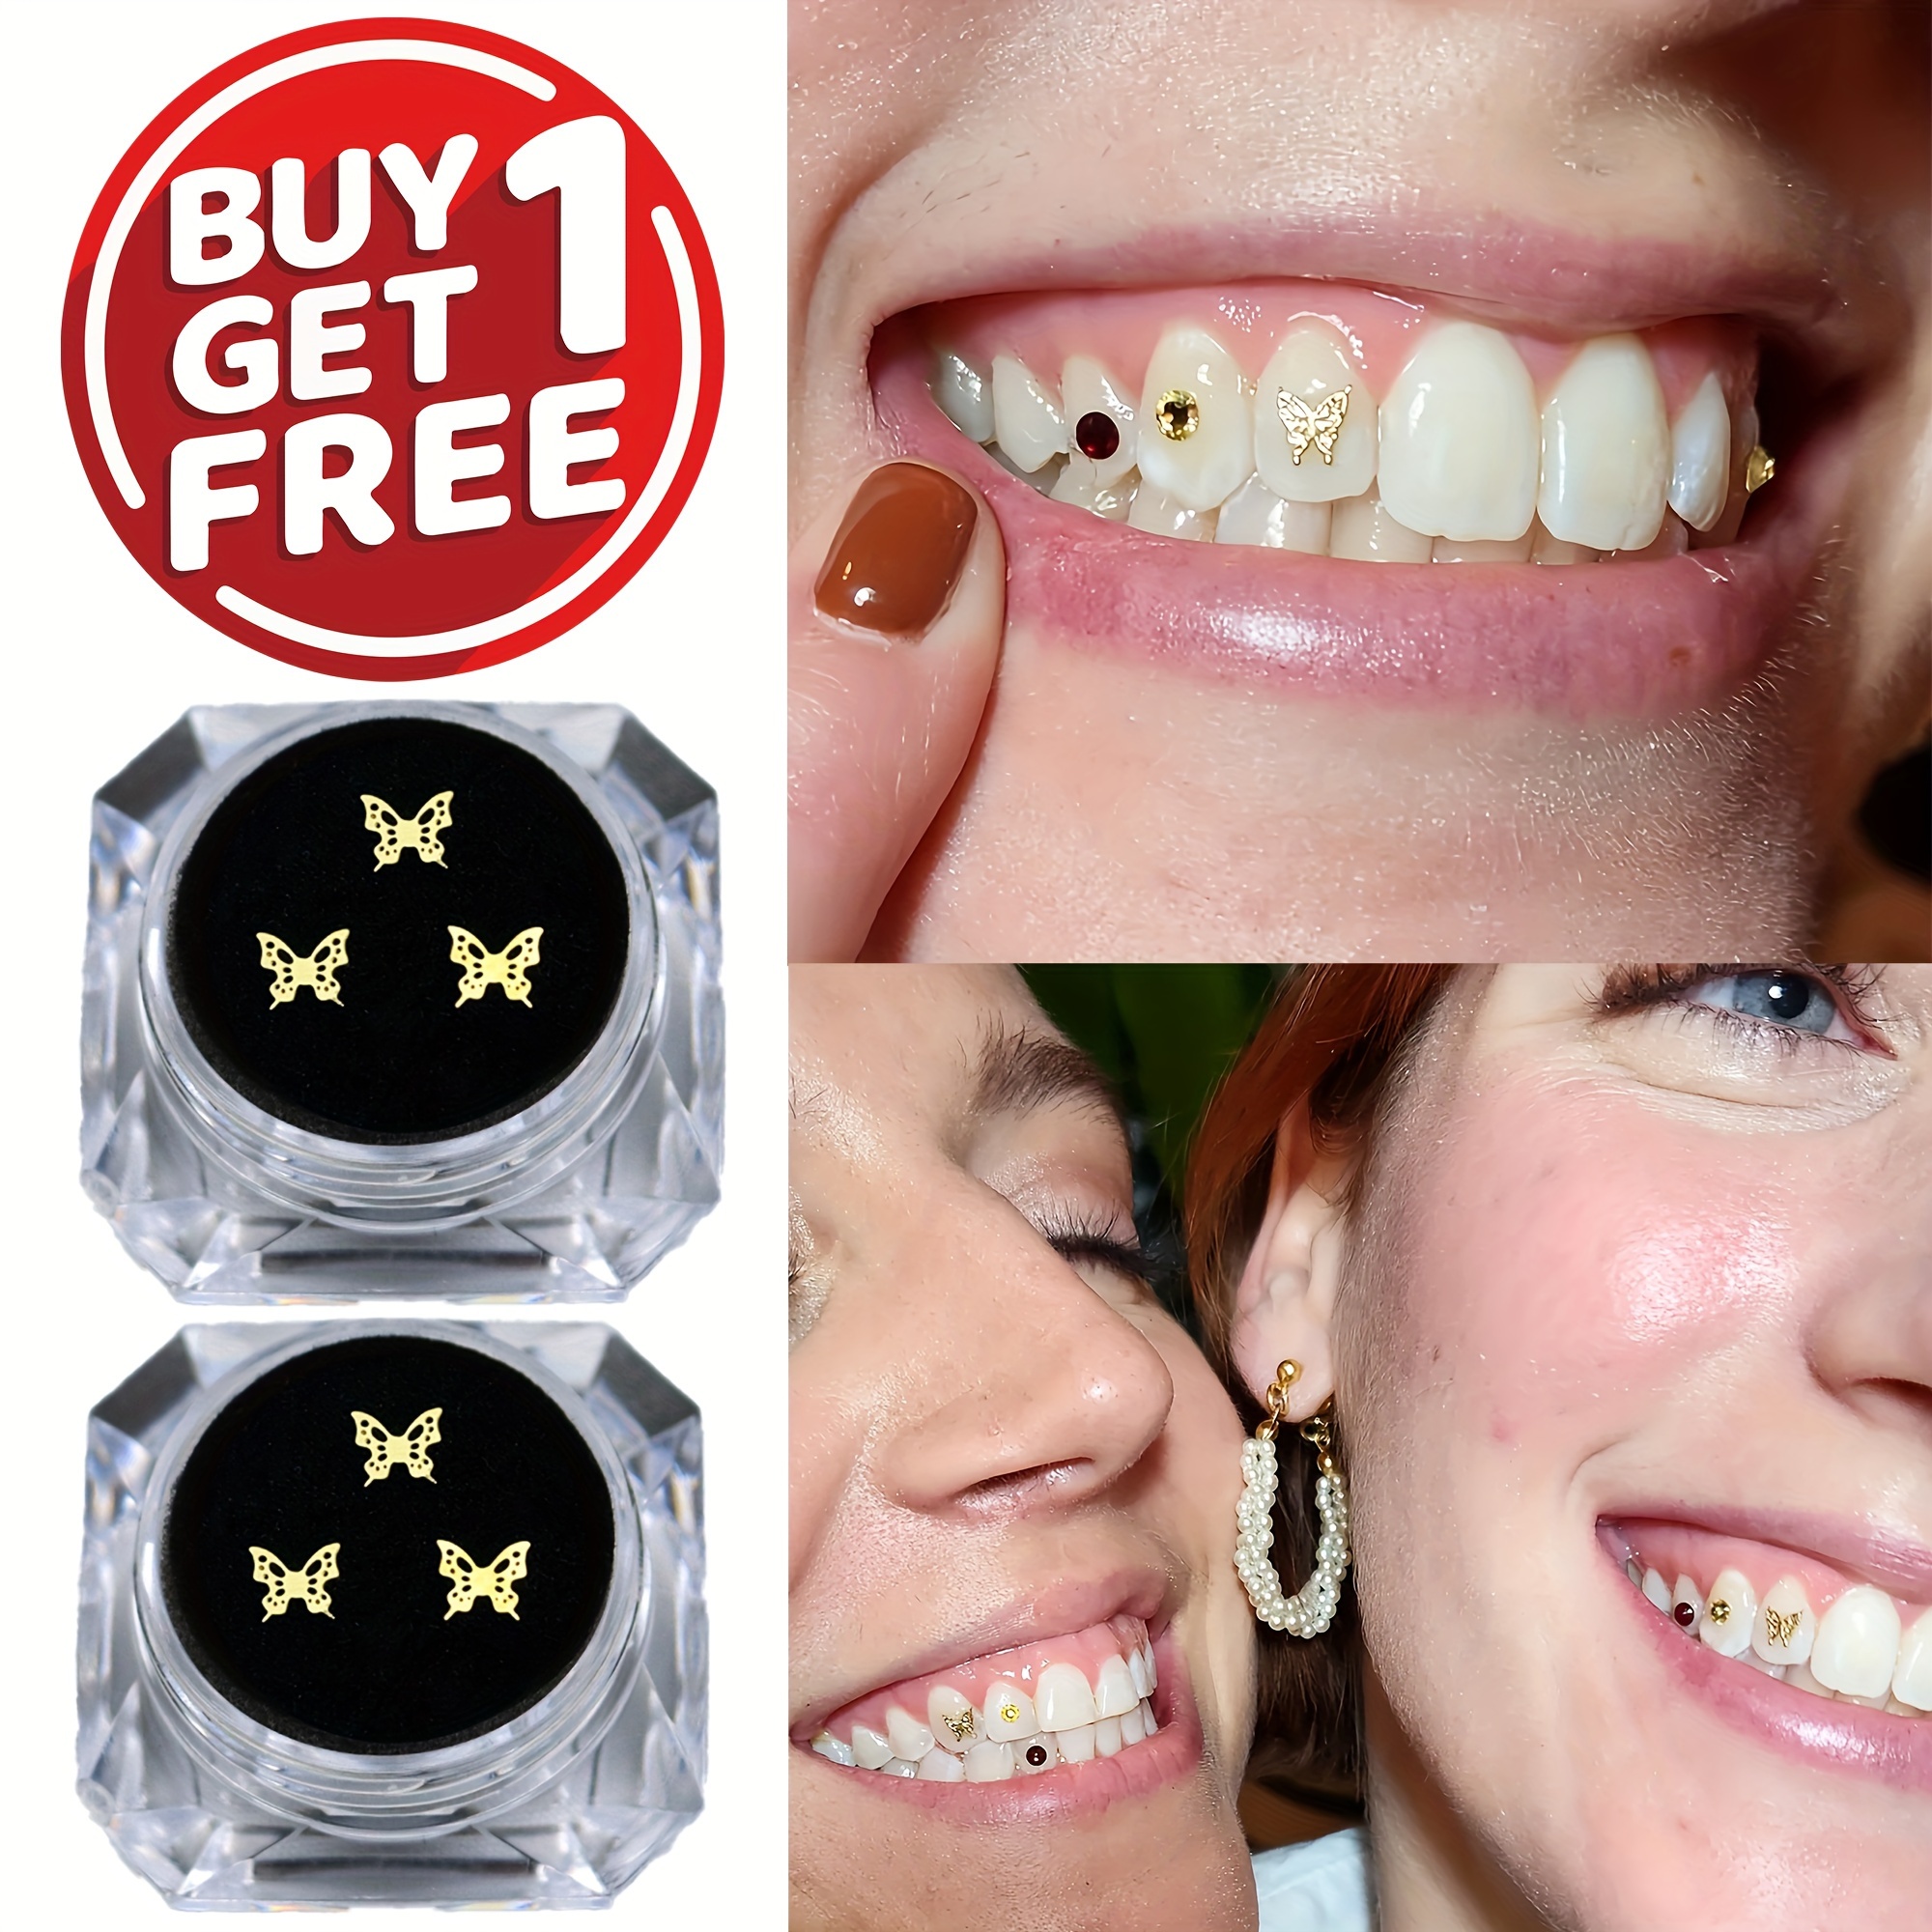 2 Sets diamond tooth gem tooth gems for teeth gems teeth jewelry ornament  tooth gems teeth crystals teeth gems nail art decorations compact Pack